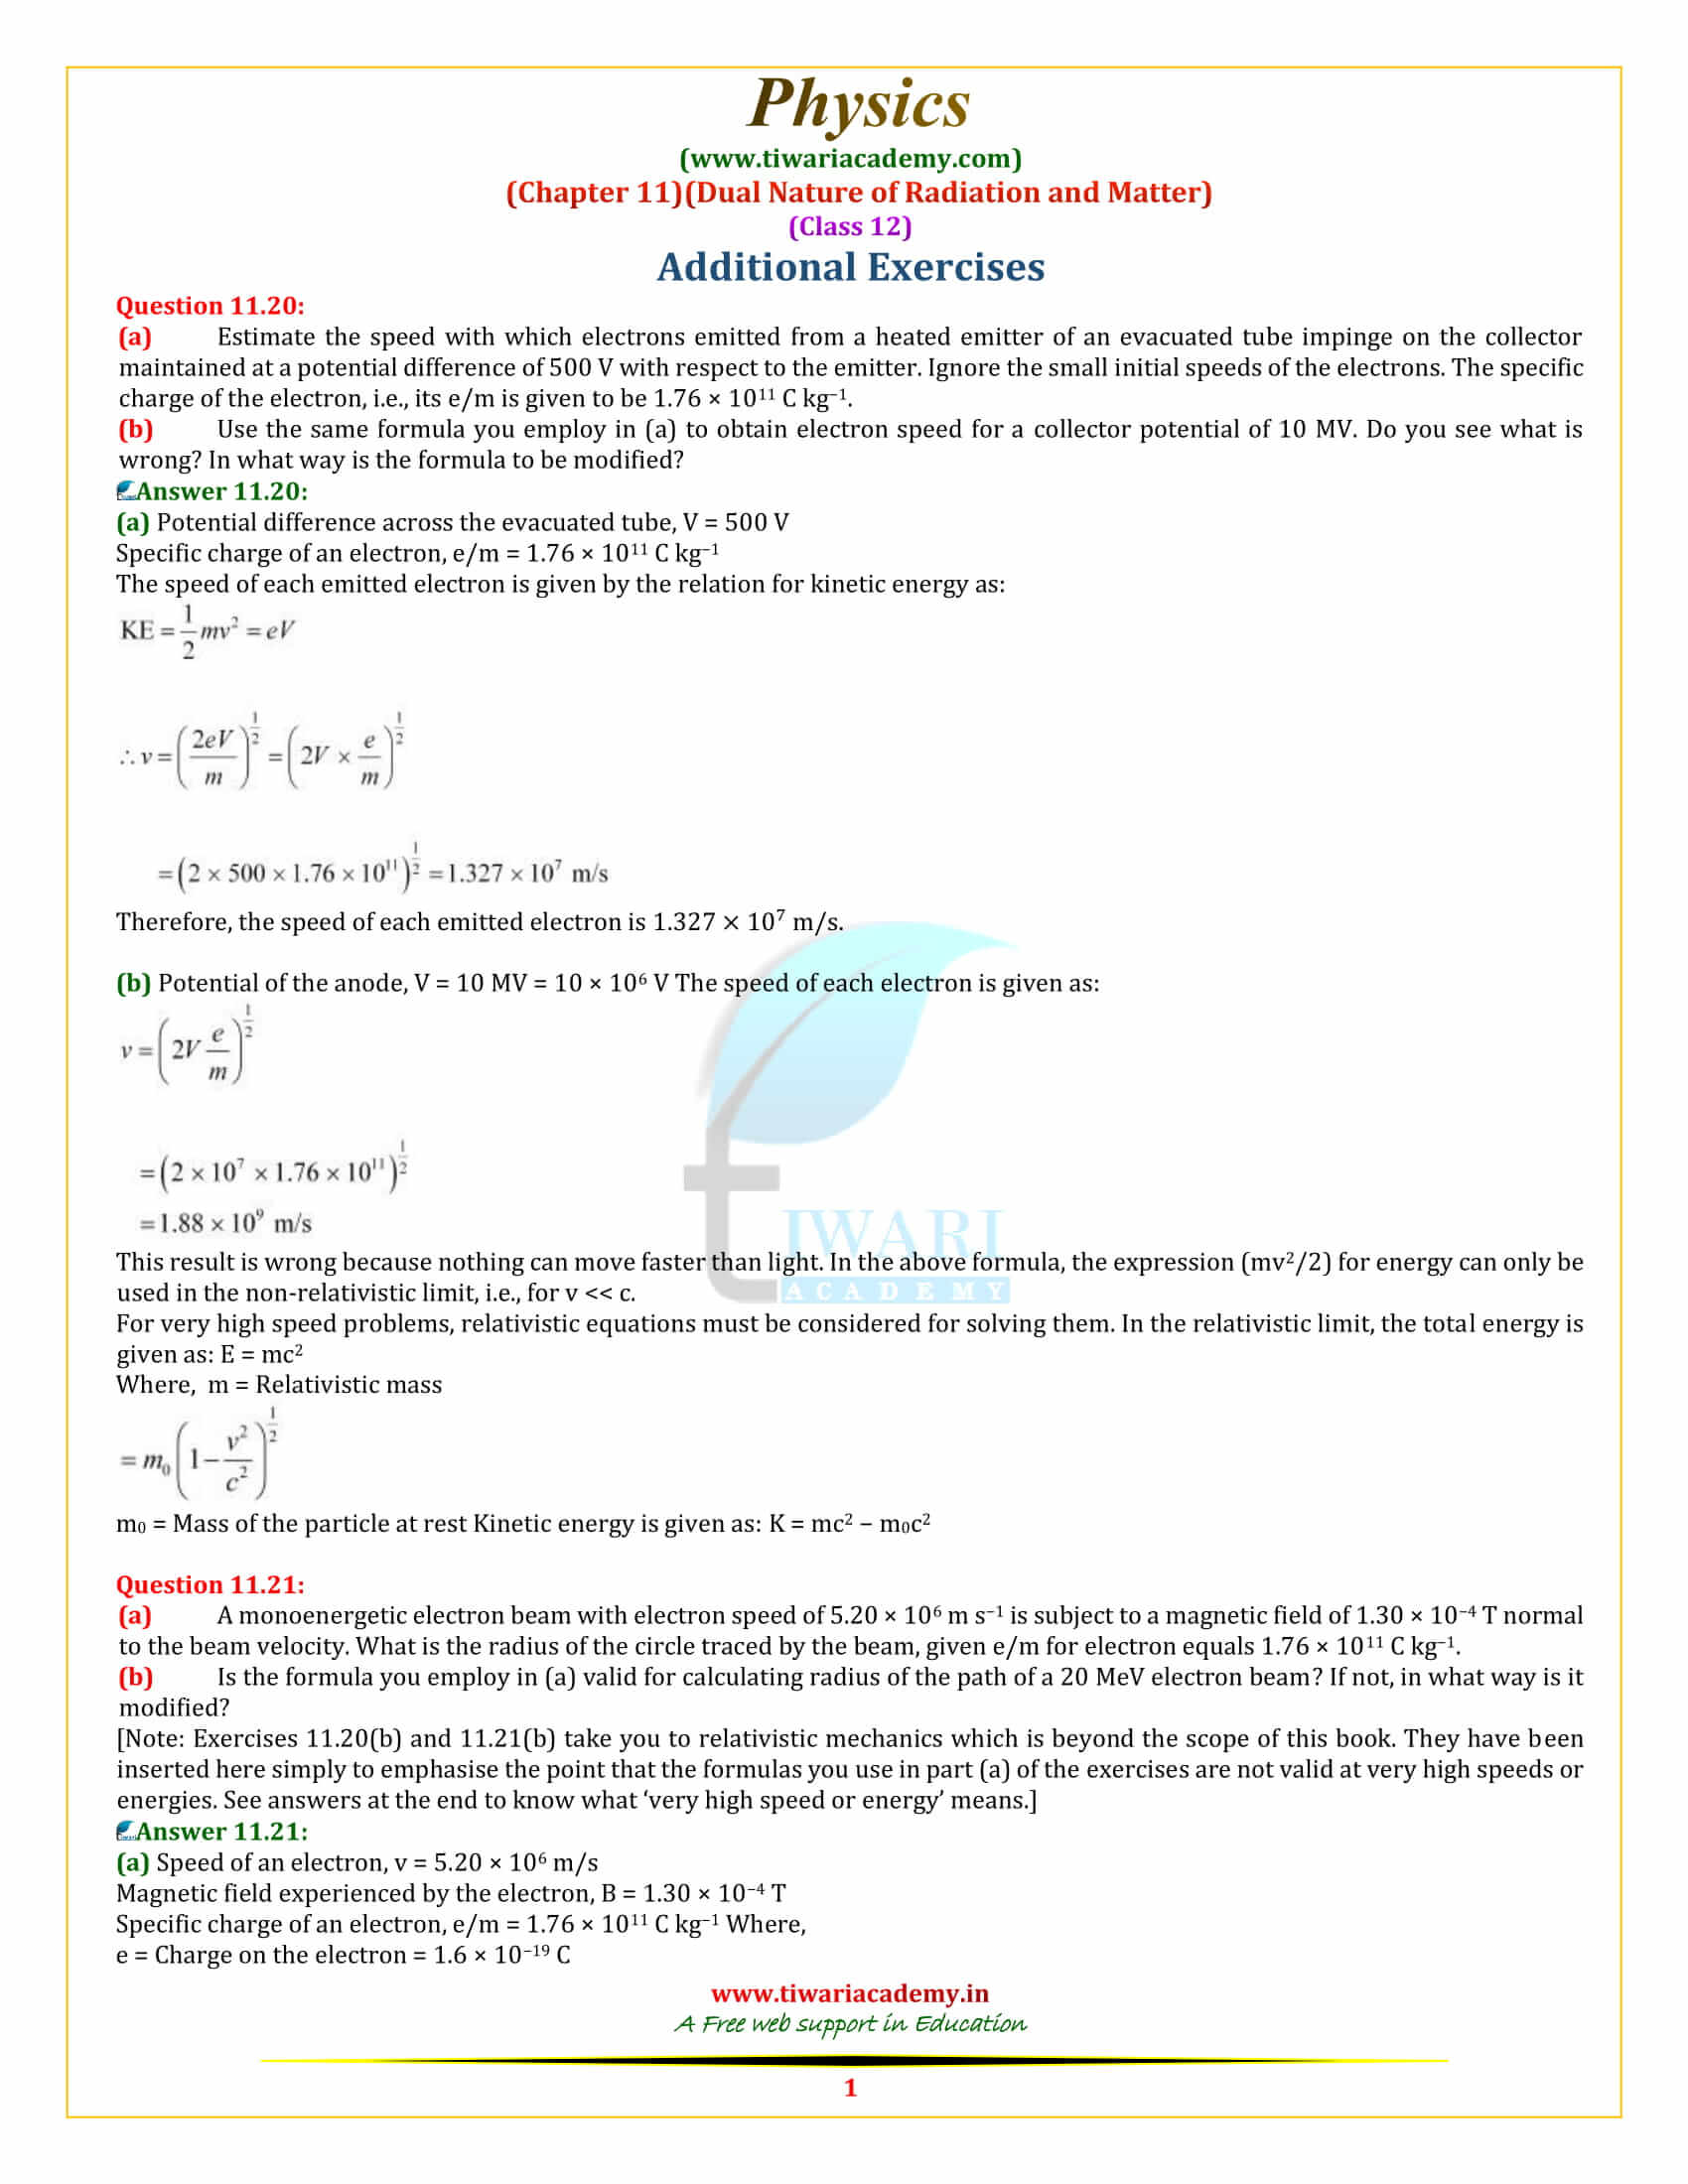 12 Physics Chapter 11 Dual Nature of Radiation and Matter additional exercises solutions in pdf form